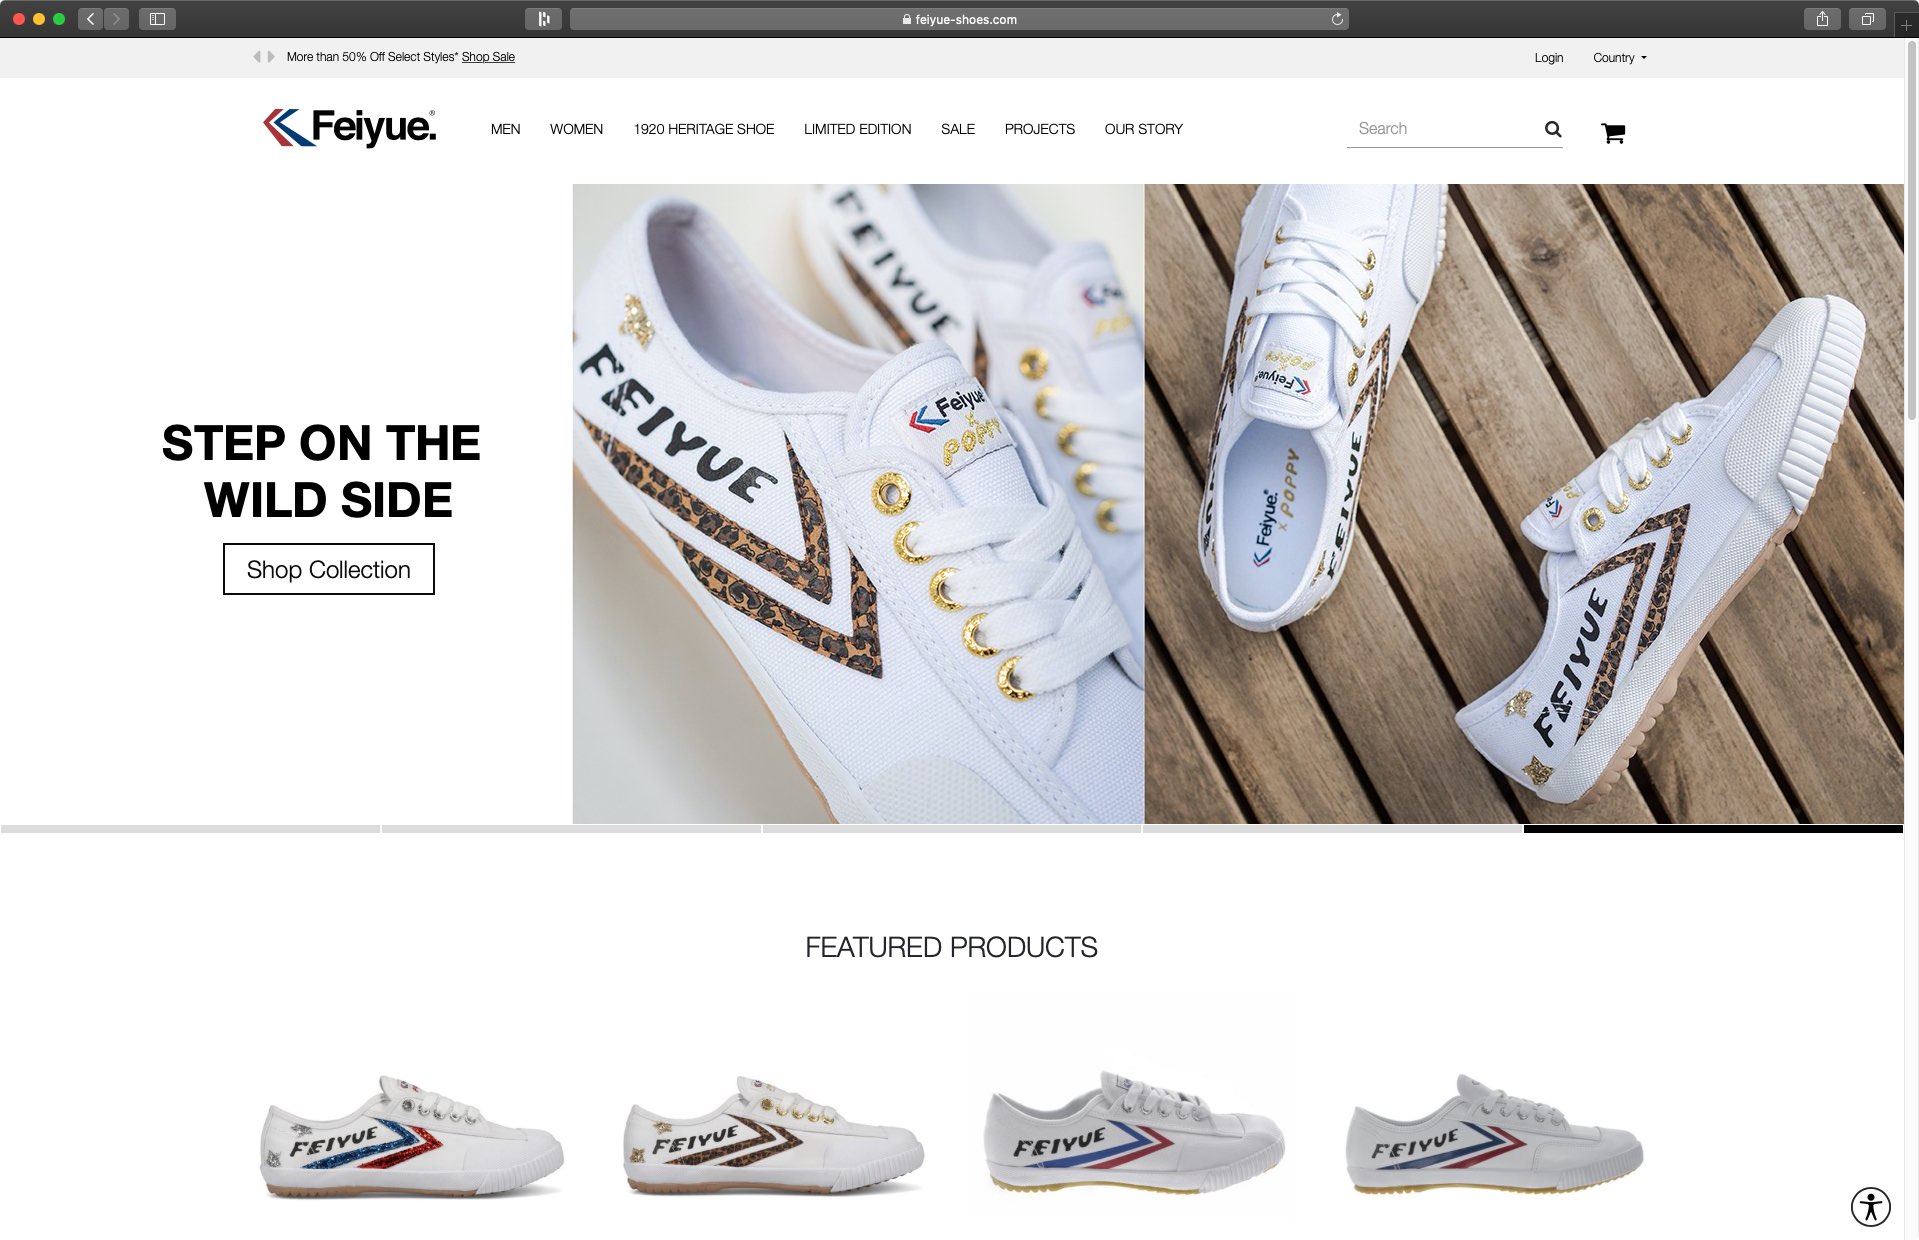 Feiyue shoes Shopify web design and development